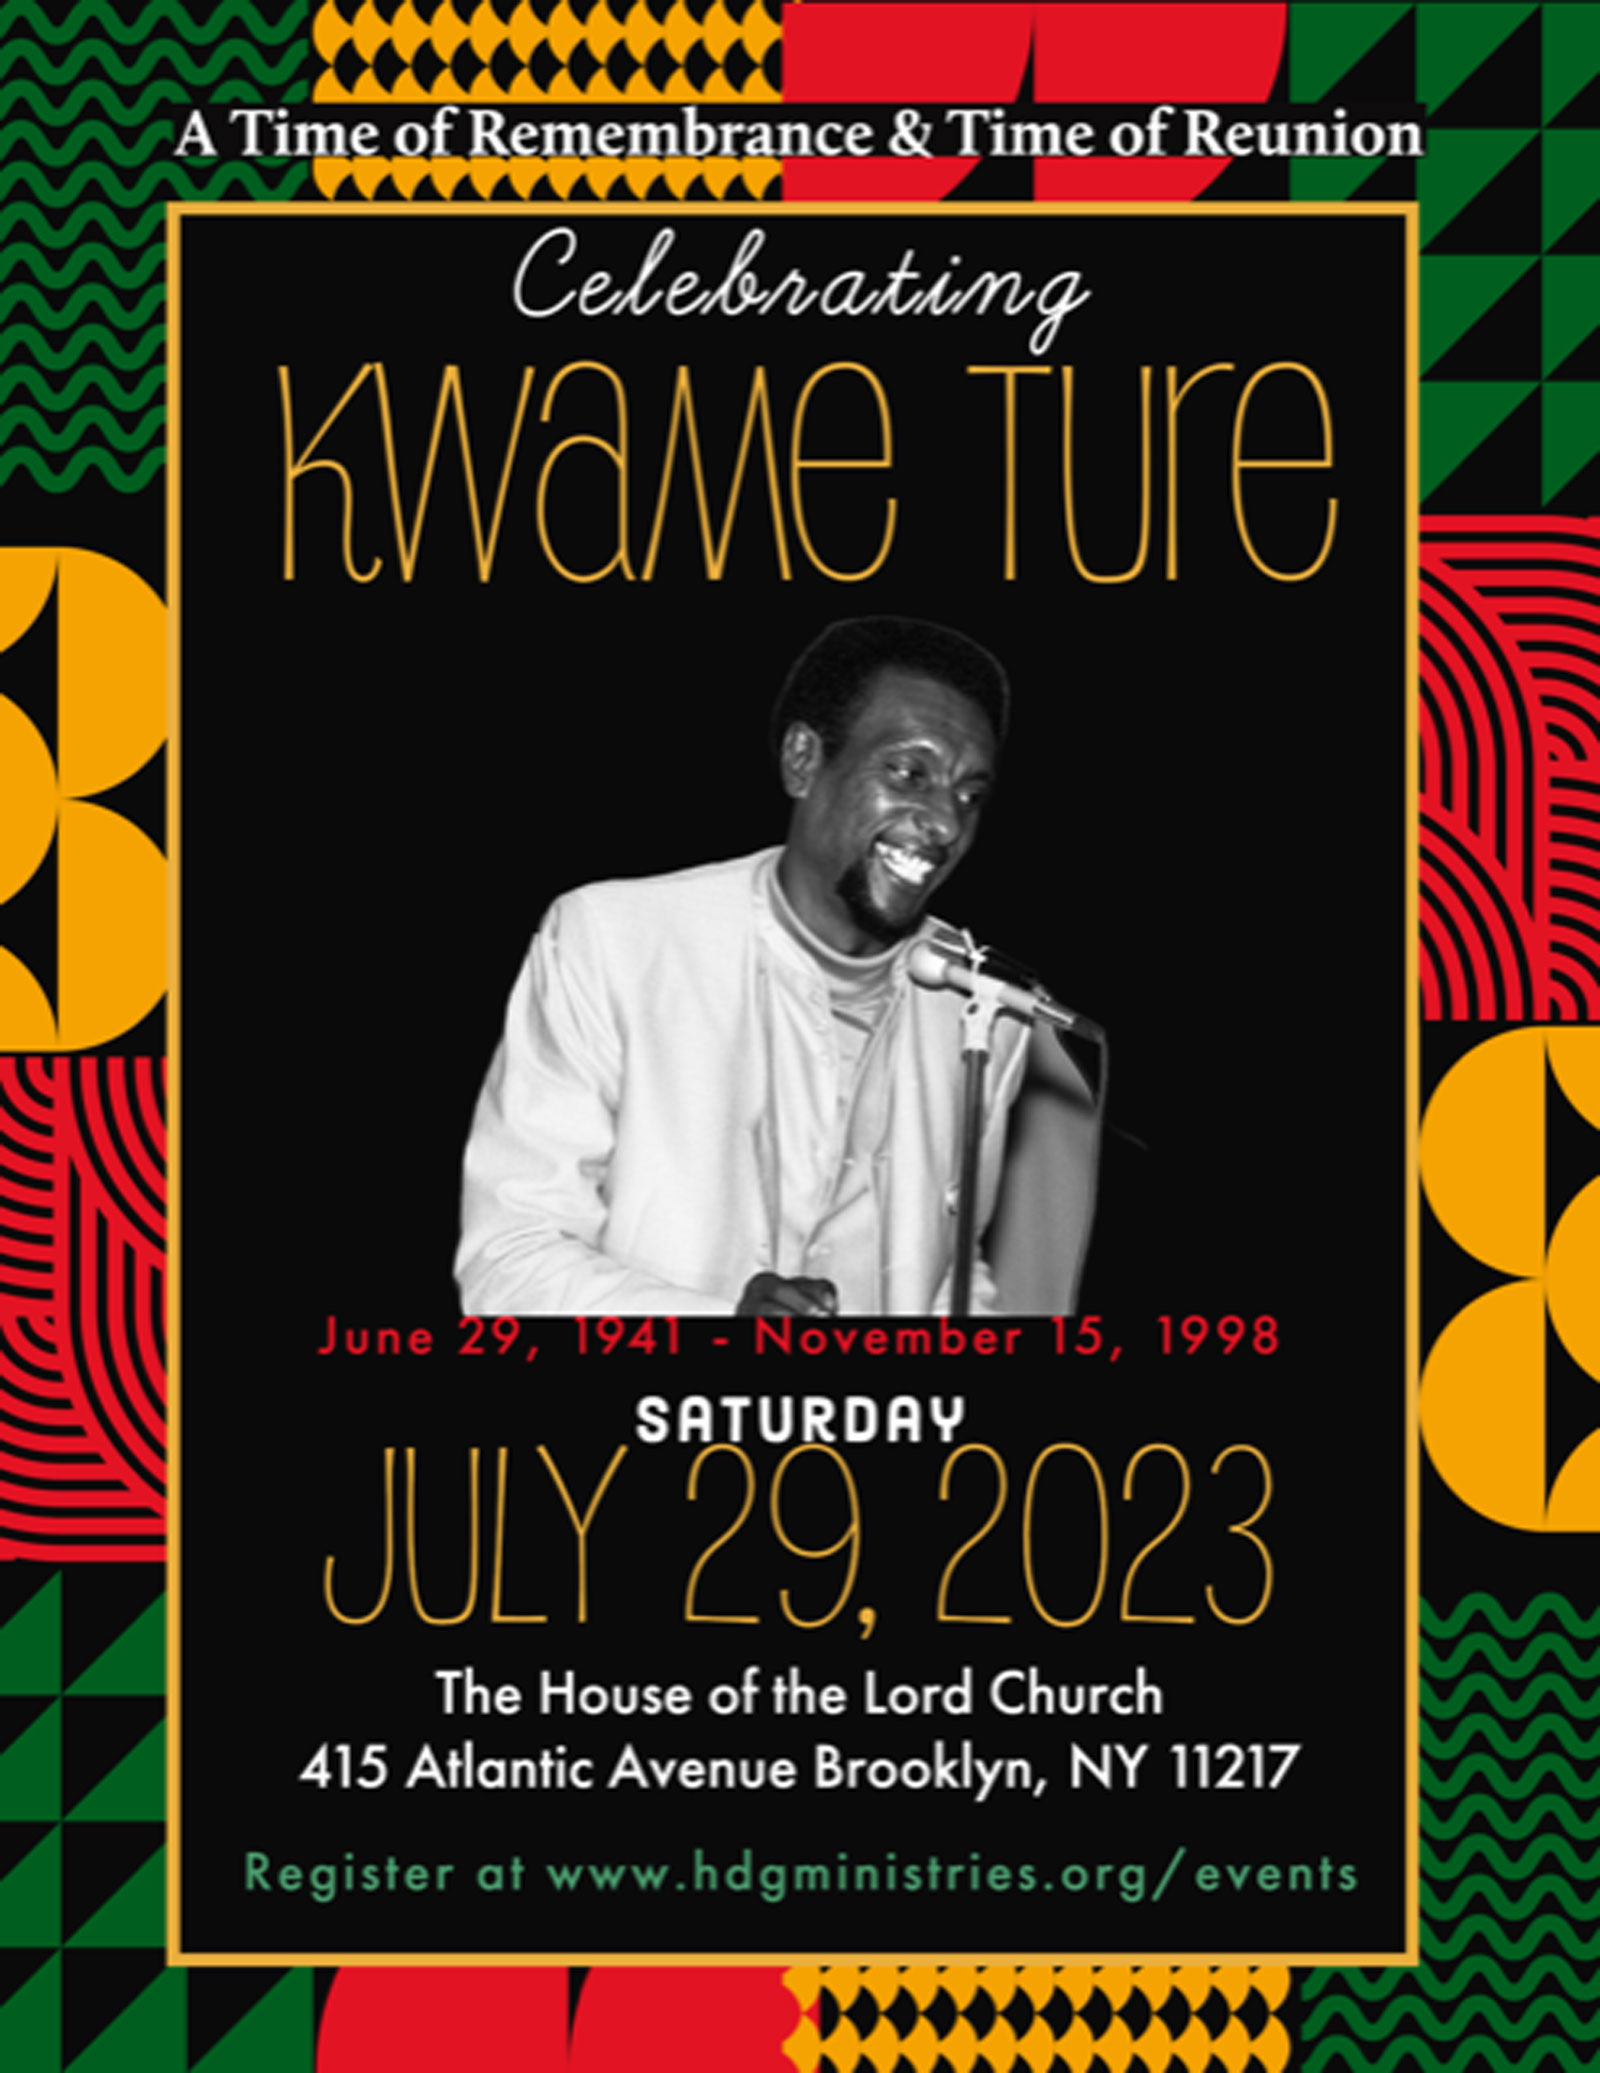 A Time of Remembrance & Time of Reunion: Celebrating Kwame Ture - July 29, 2023 Brooklyn, NY